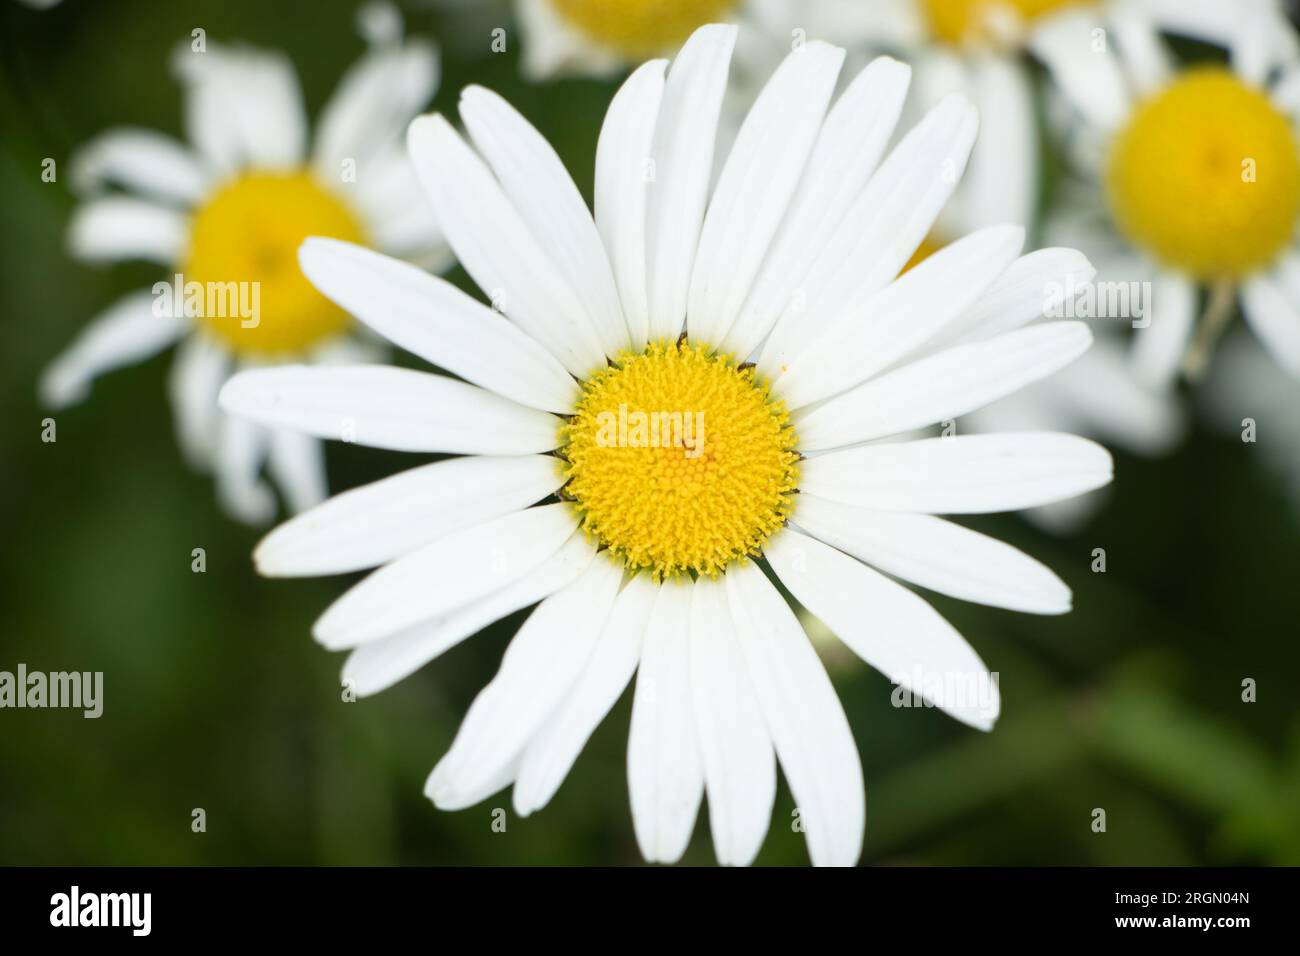 Chamomile flowers close-up. White petals of daisy flower. Summer natural background. Stock Photo